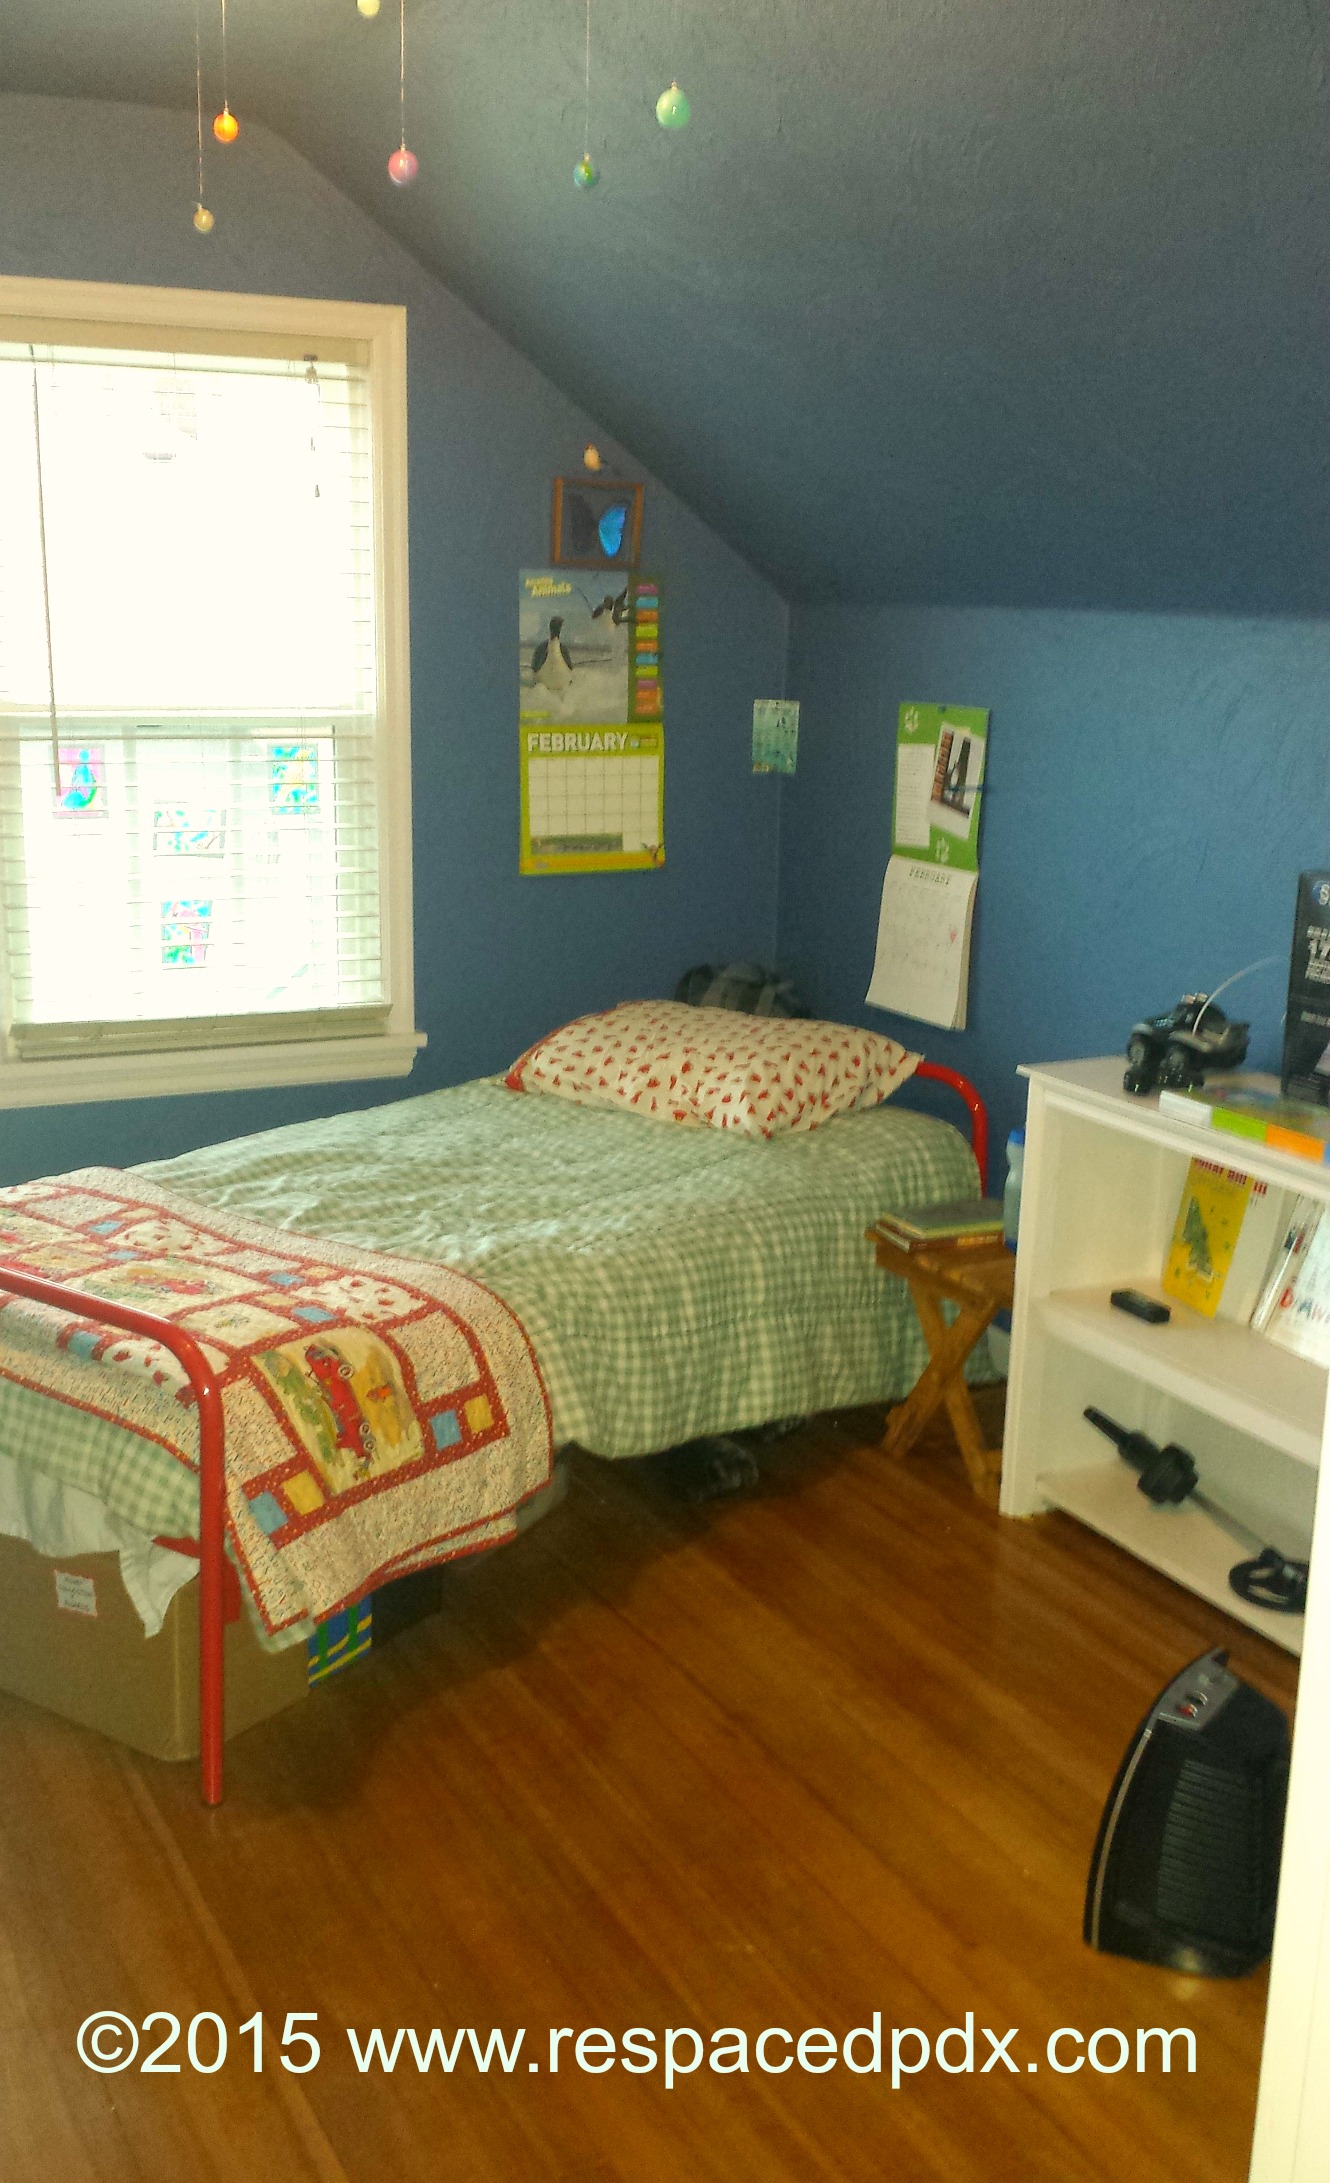 The 9-year-old organizer Feng Shuiâ€™s his bedroom